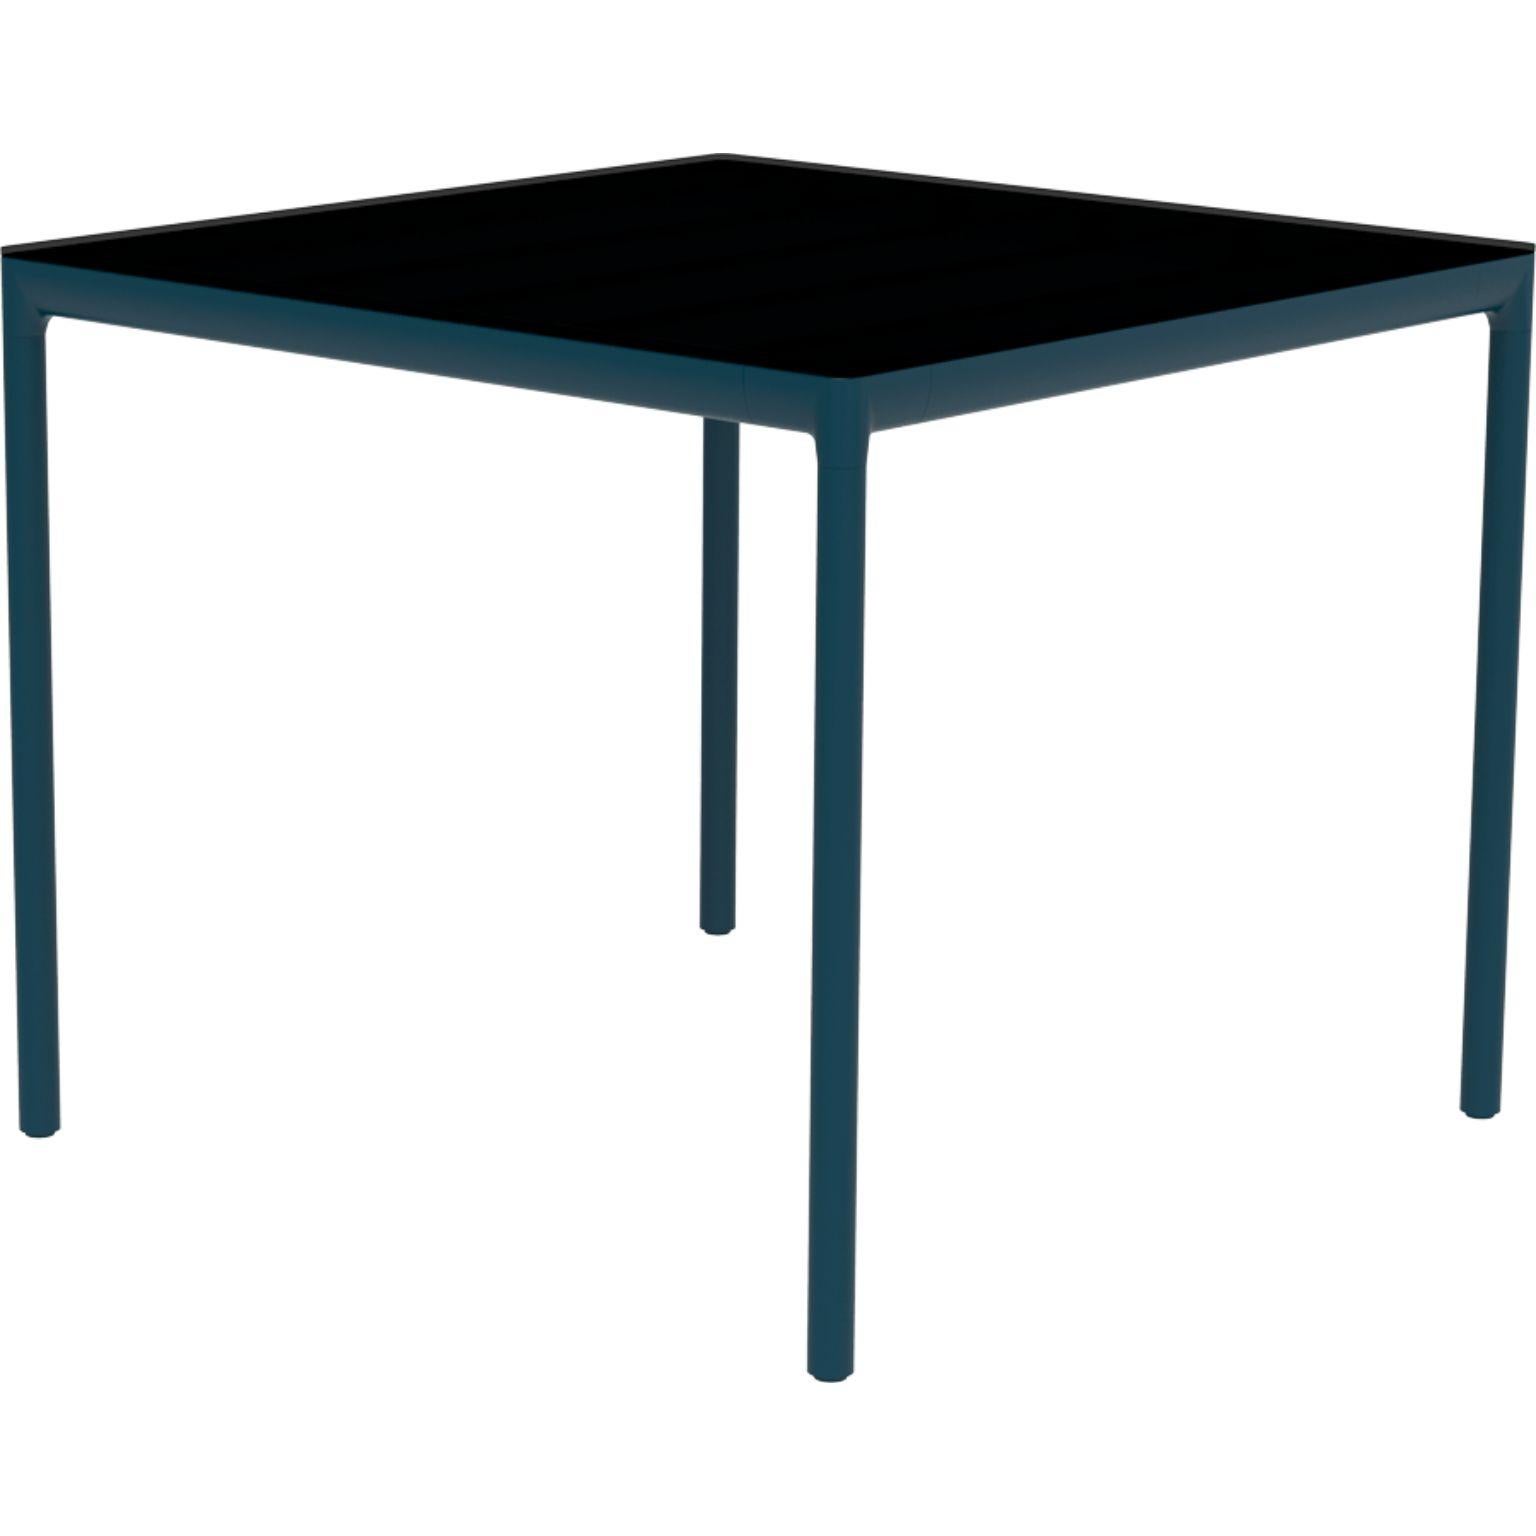 Ribbons navy 90 table by MOWEE
Dimensions: D90 x W90 x H75 cm.
Material: Aluminium and HPL top.
Weight: 16 kg.
Also available in different colors and finishes. (HPL Black Edge or Neolith top).

An unmistakable collection for its beauty and